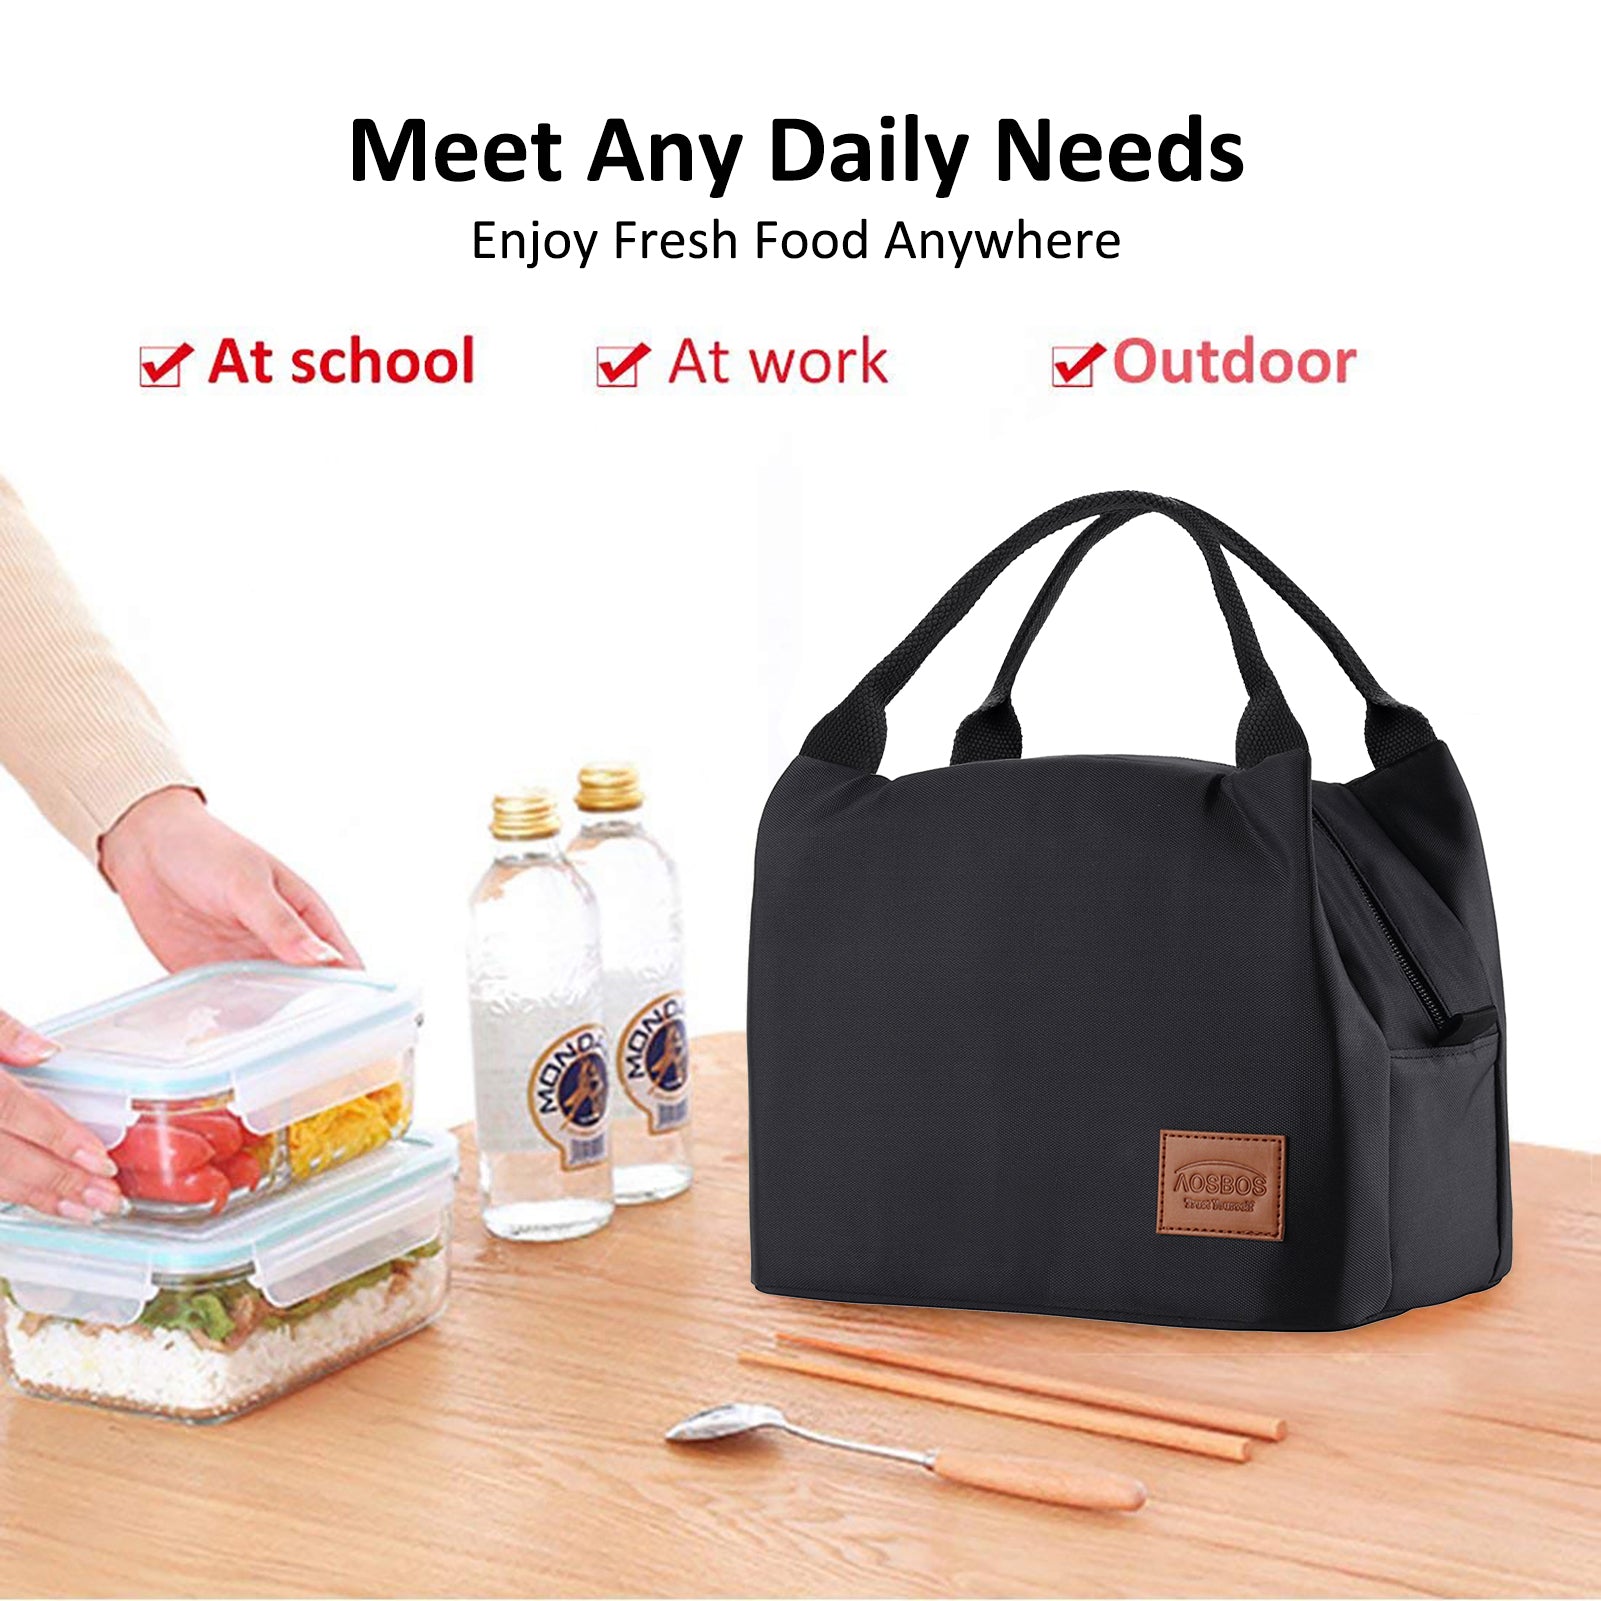 Aosbos Insulated Lunch Box for Men Women Leakproof Cooler Bag Reusable  Lunch Tote Bag Adult Lunch Pa…See more Aosbos Insulated Lunch Box for Men  Women